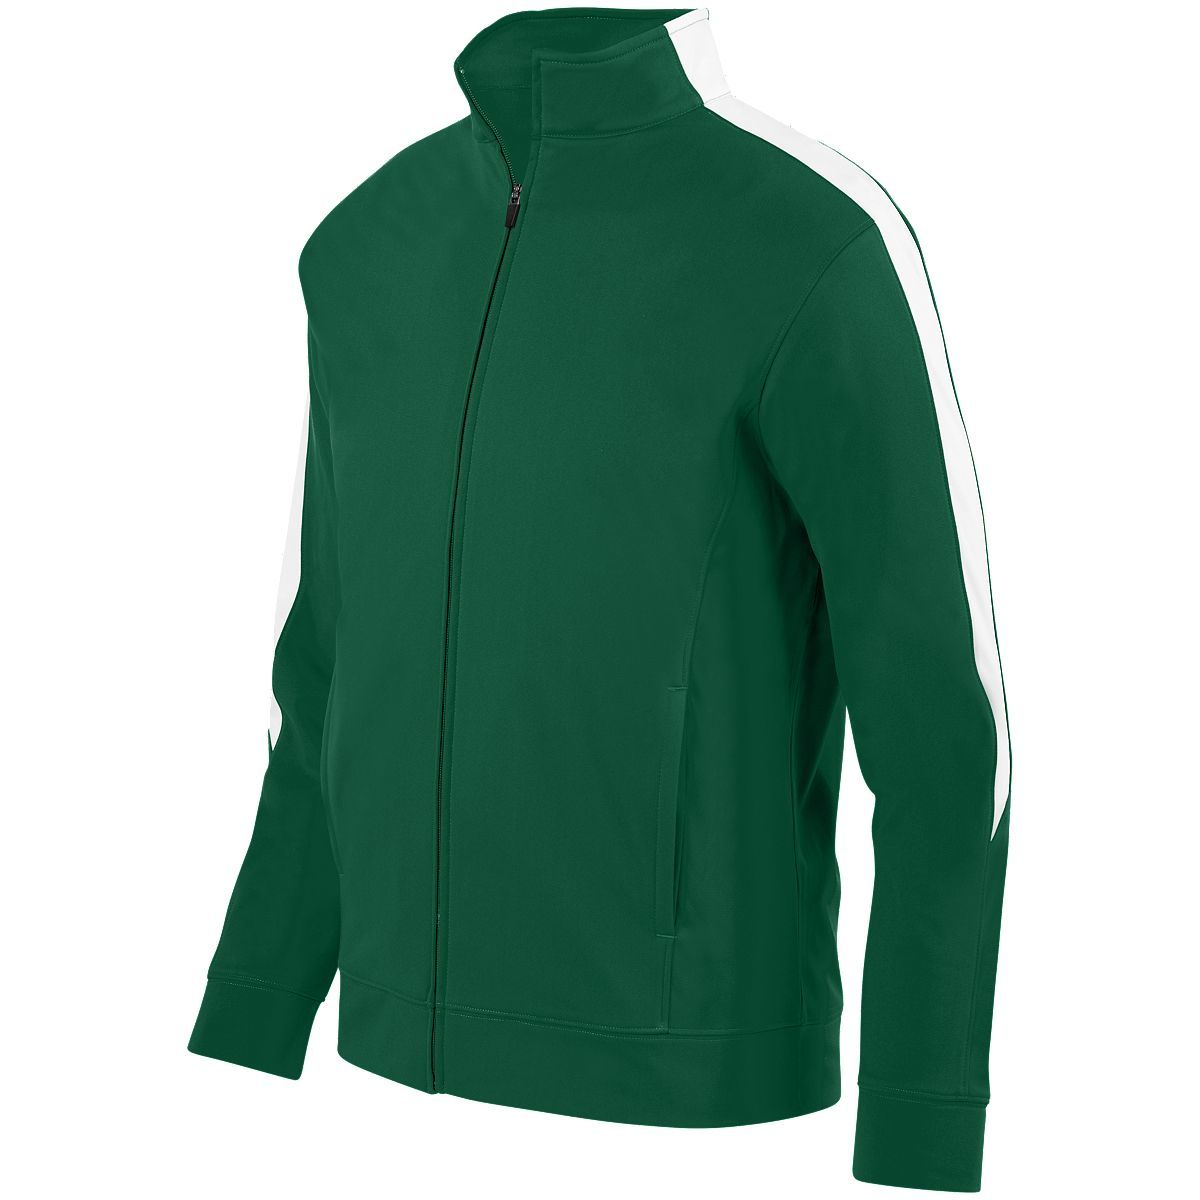 Augusta Sportswear Youth Medalist Jacket 2.0 in Dark Green/White  -Part of the Youth, Youth-Jacket, Augusta-Products, Outerwear product lines at KanaleyCreations.com